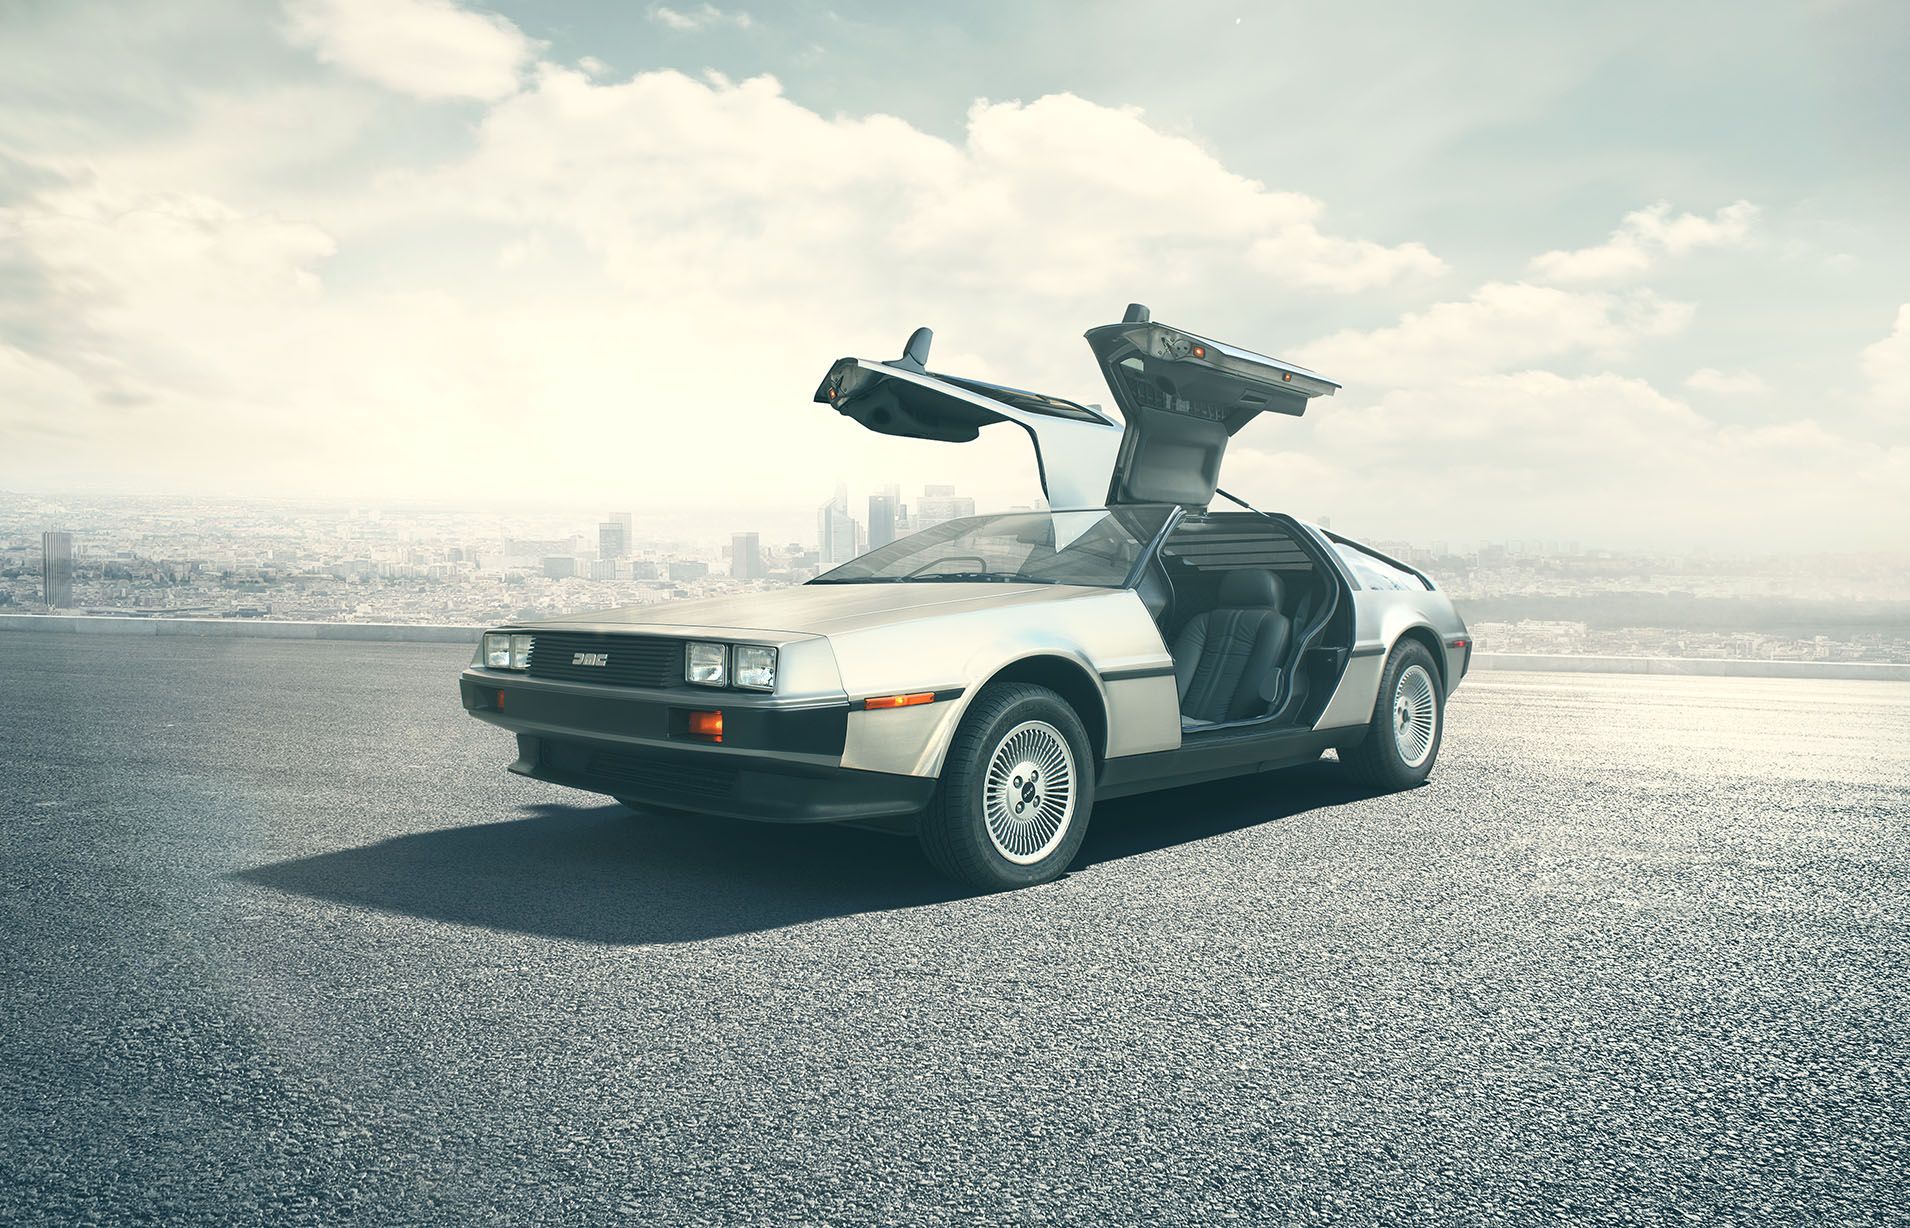 DMC DeLorean: The troubled past of the car that went back to the future